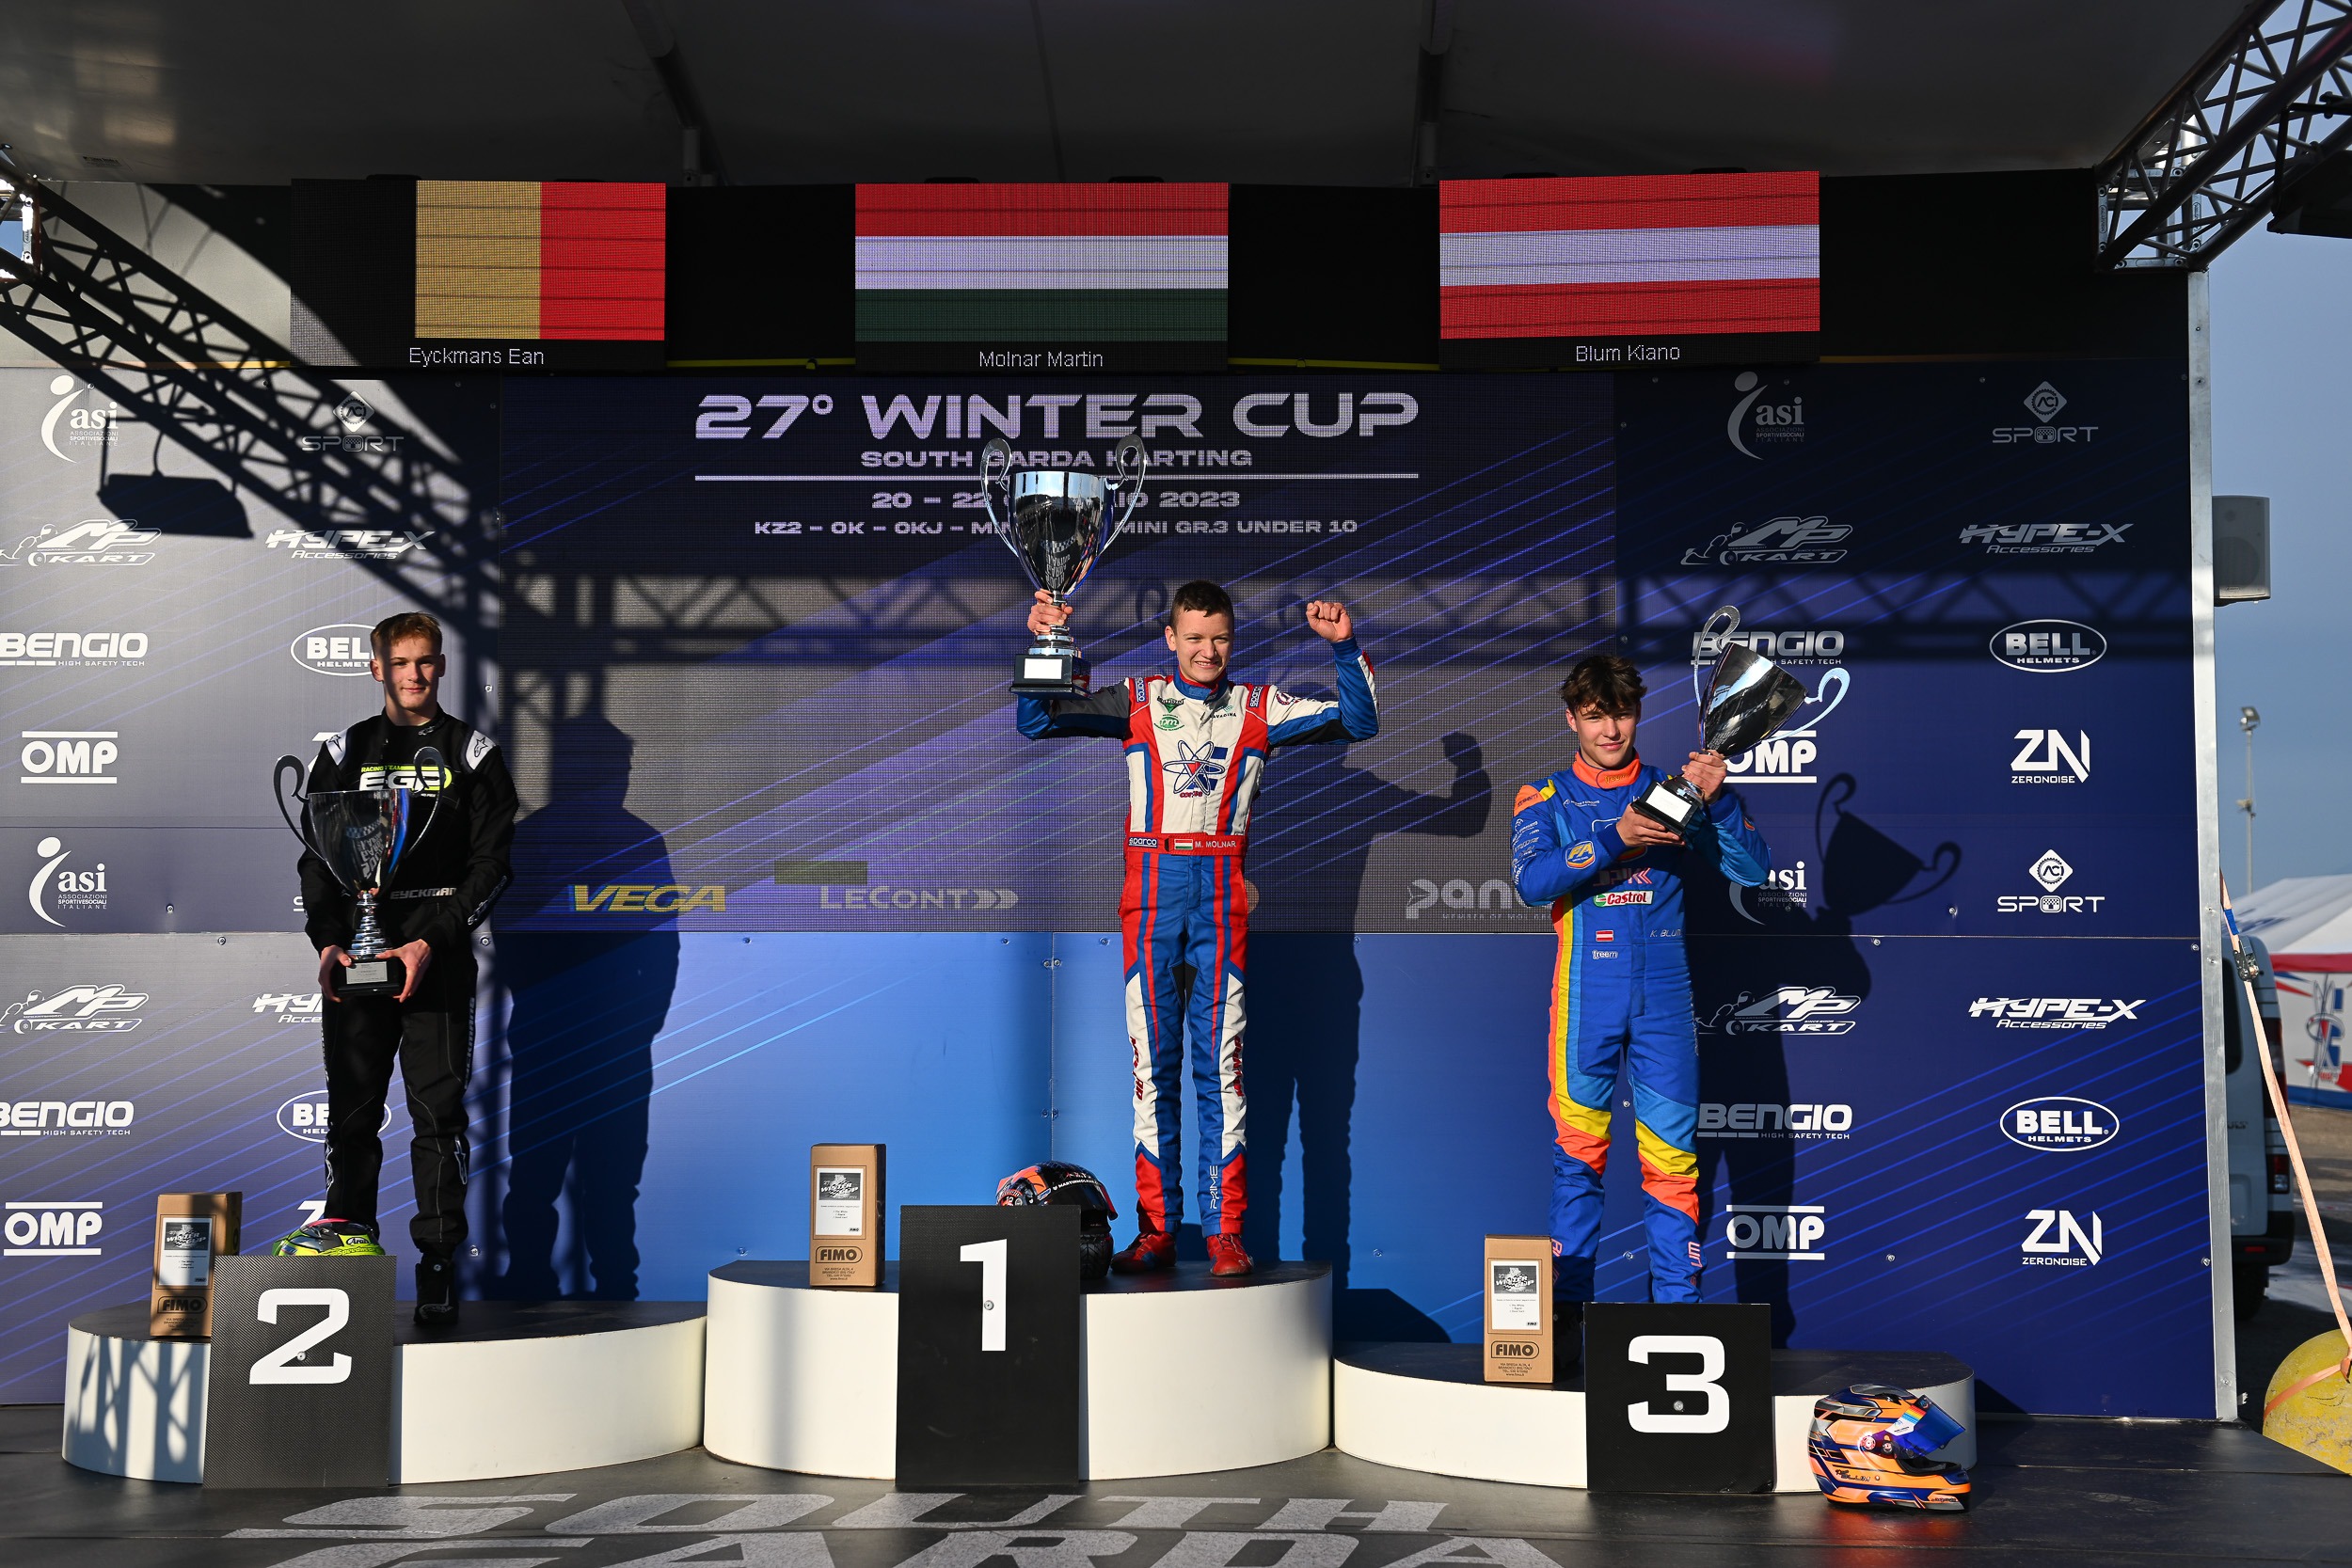 A sensational victory for Martin Molnár in the 27th Winter Cup karting competition